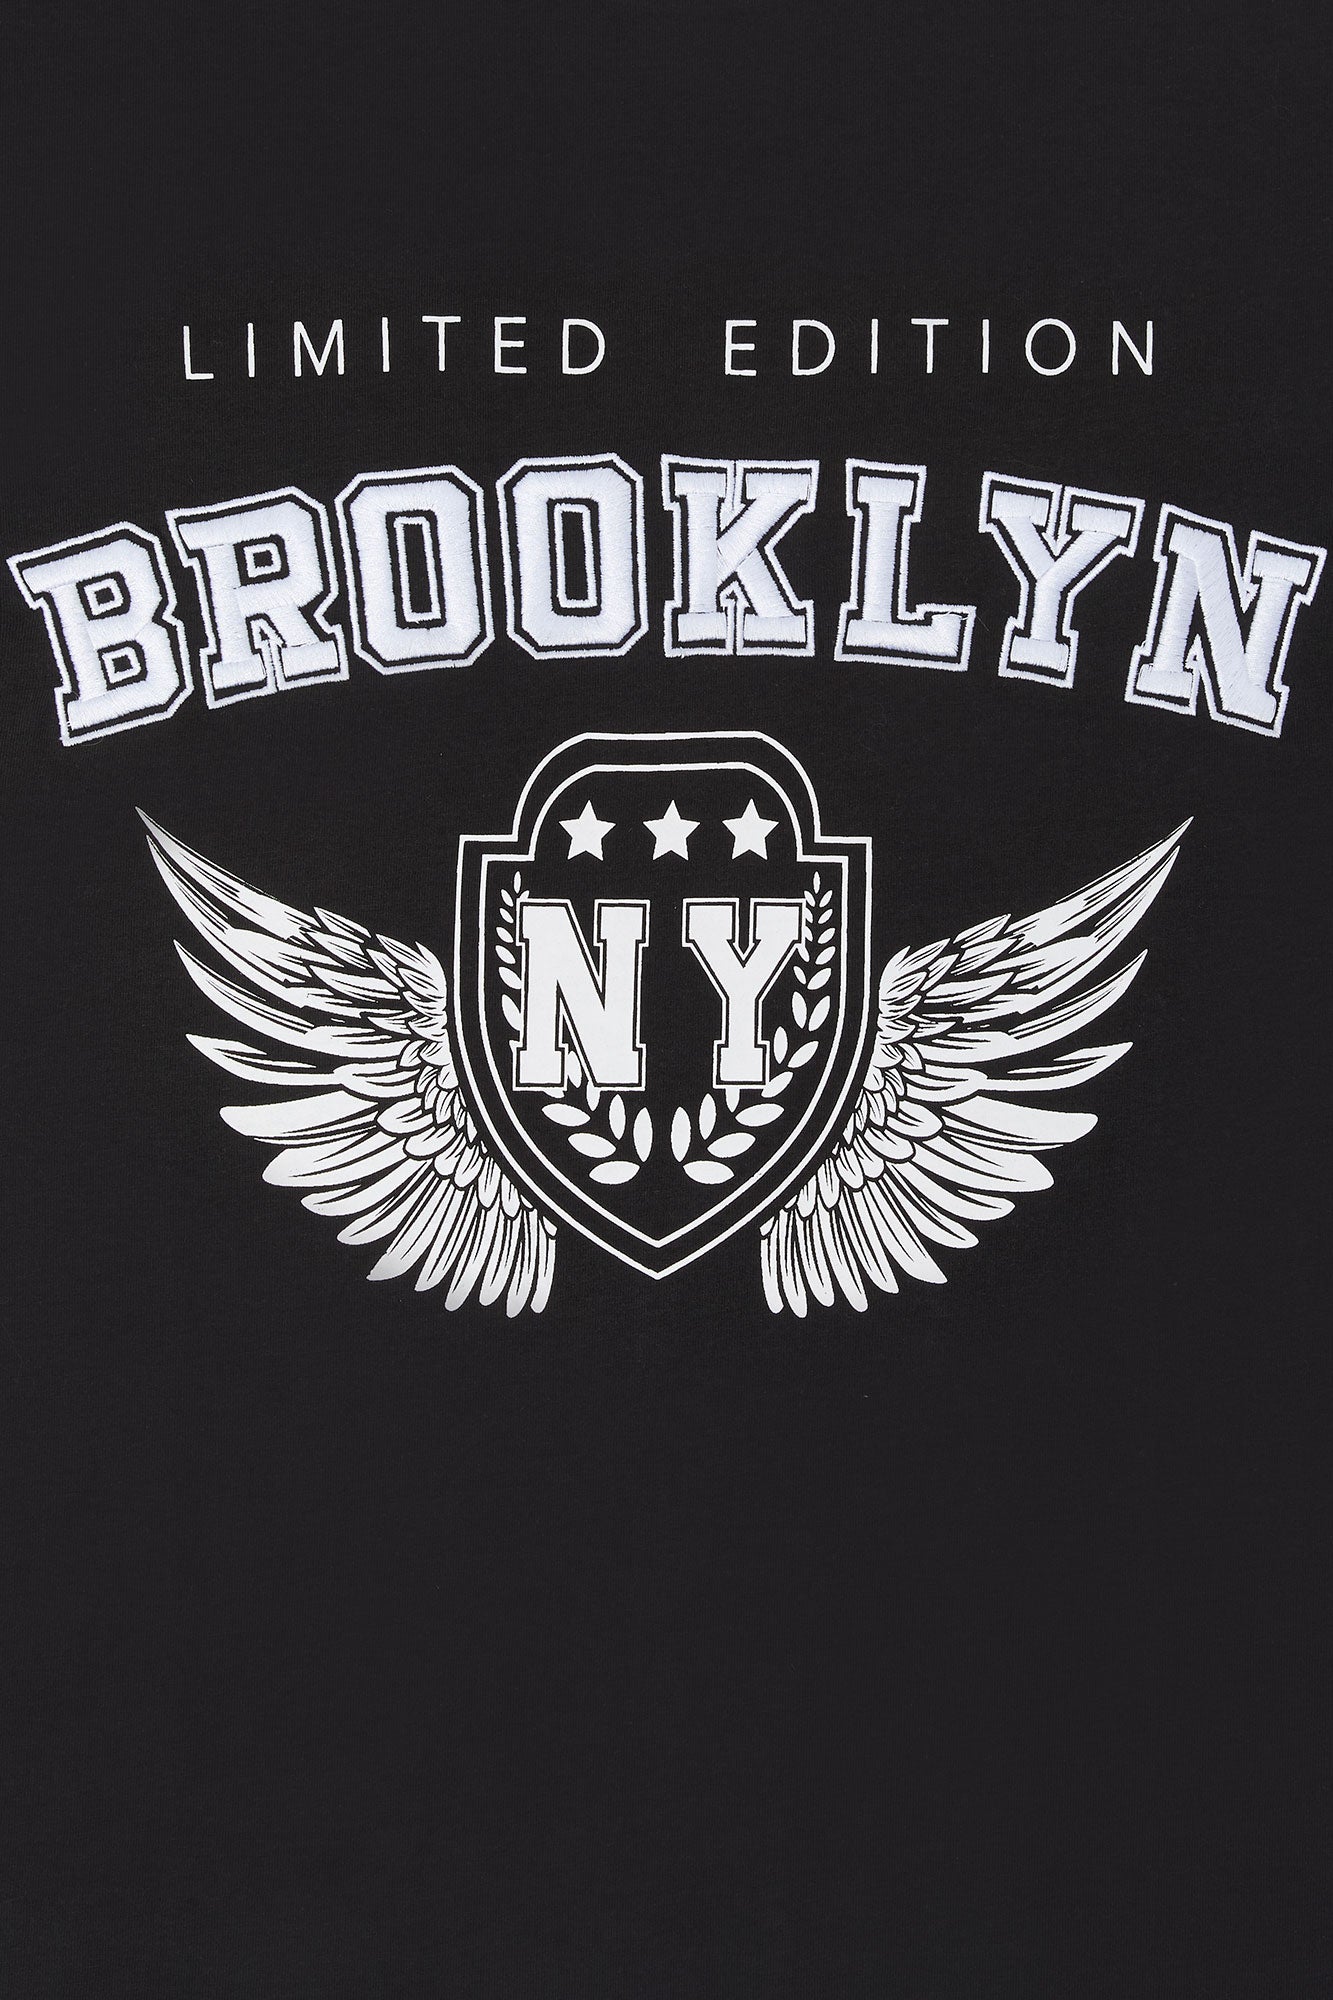 Brooklyn Embroidered Oversized T-Shirt